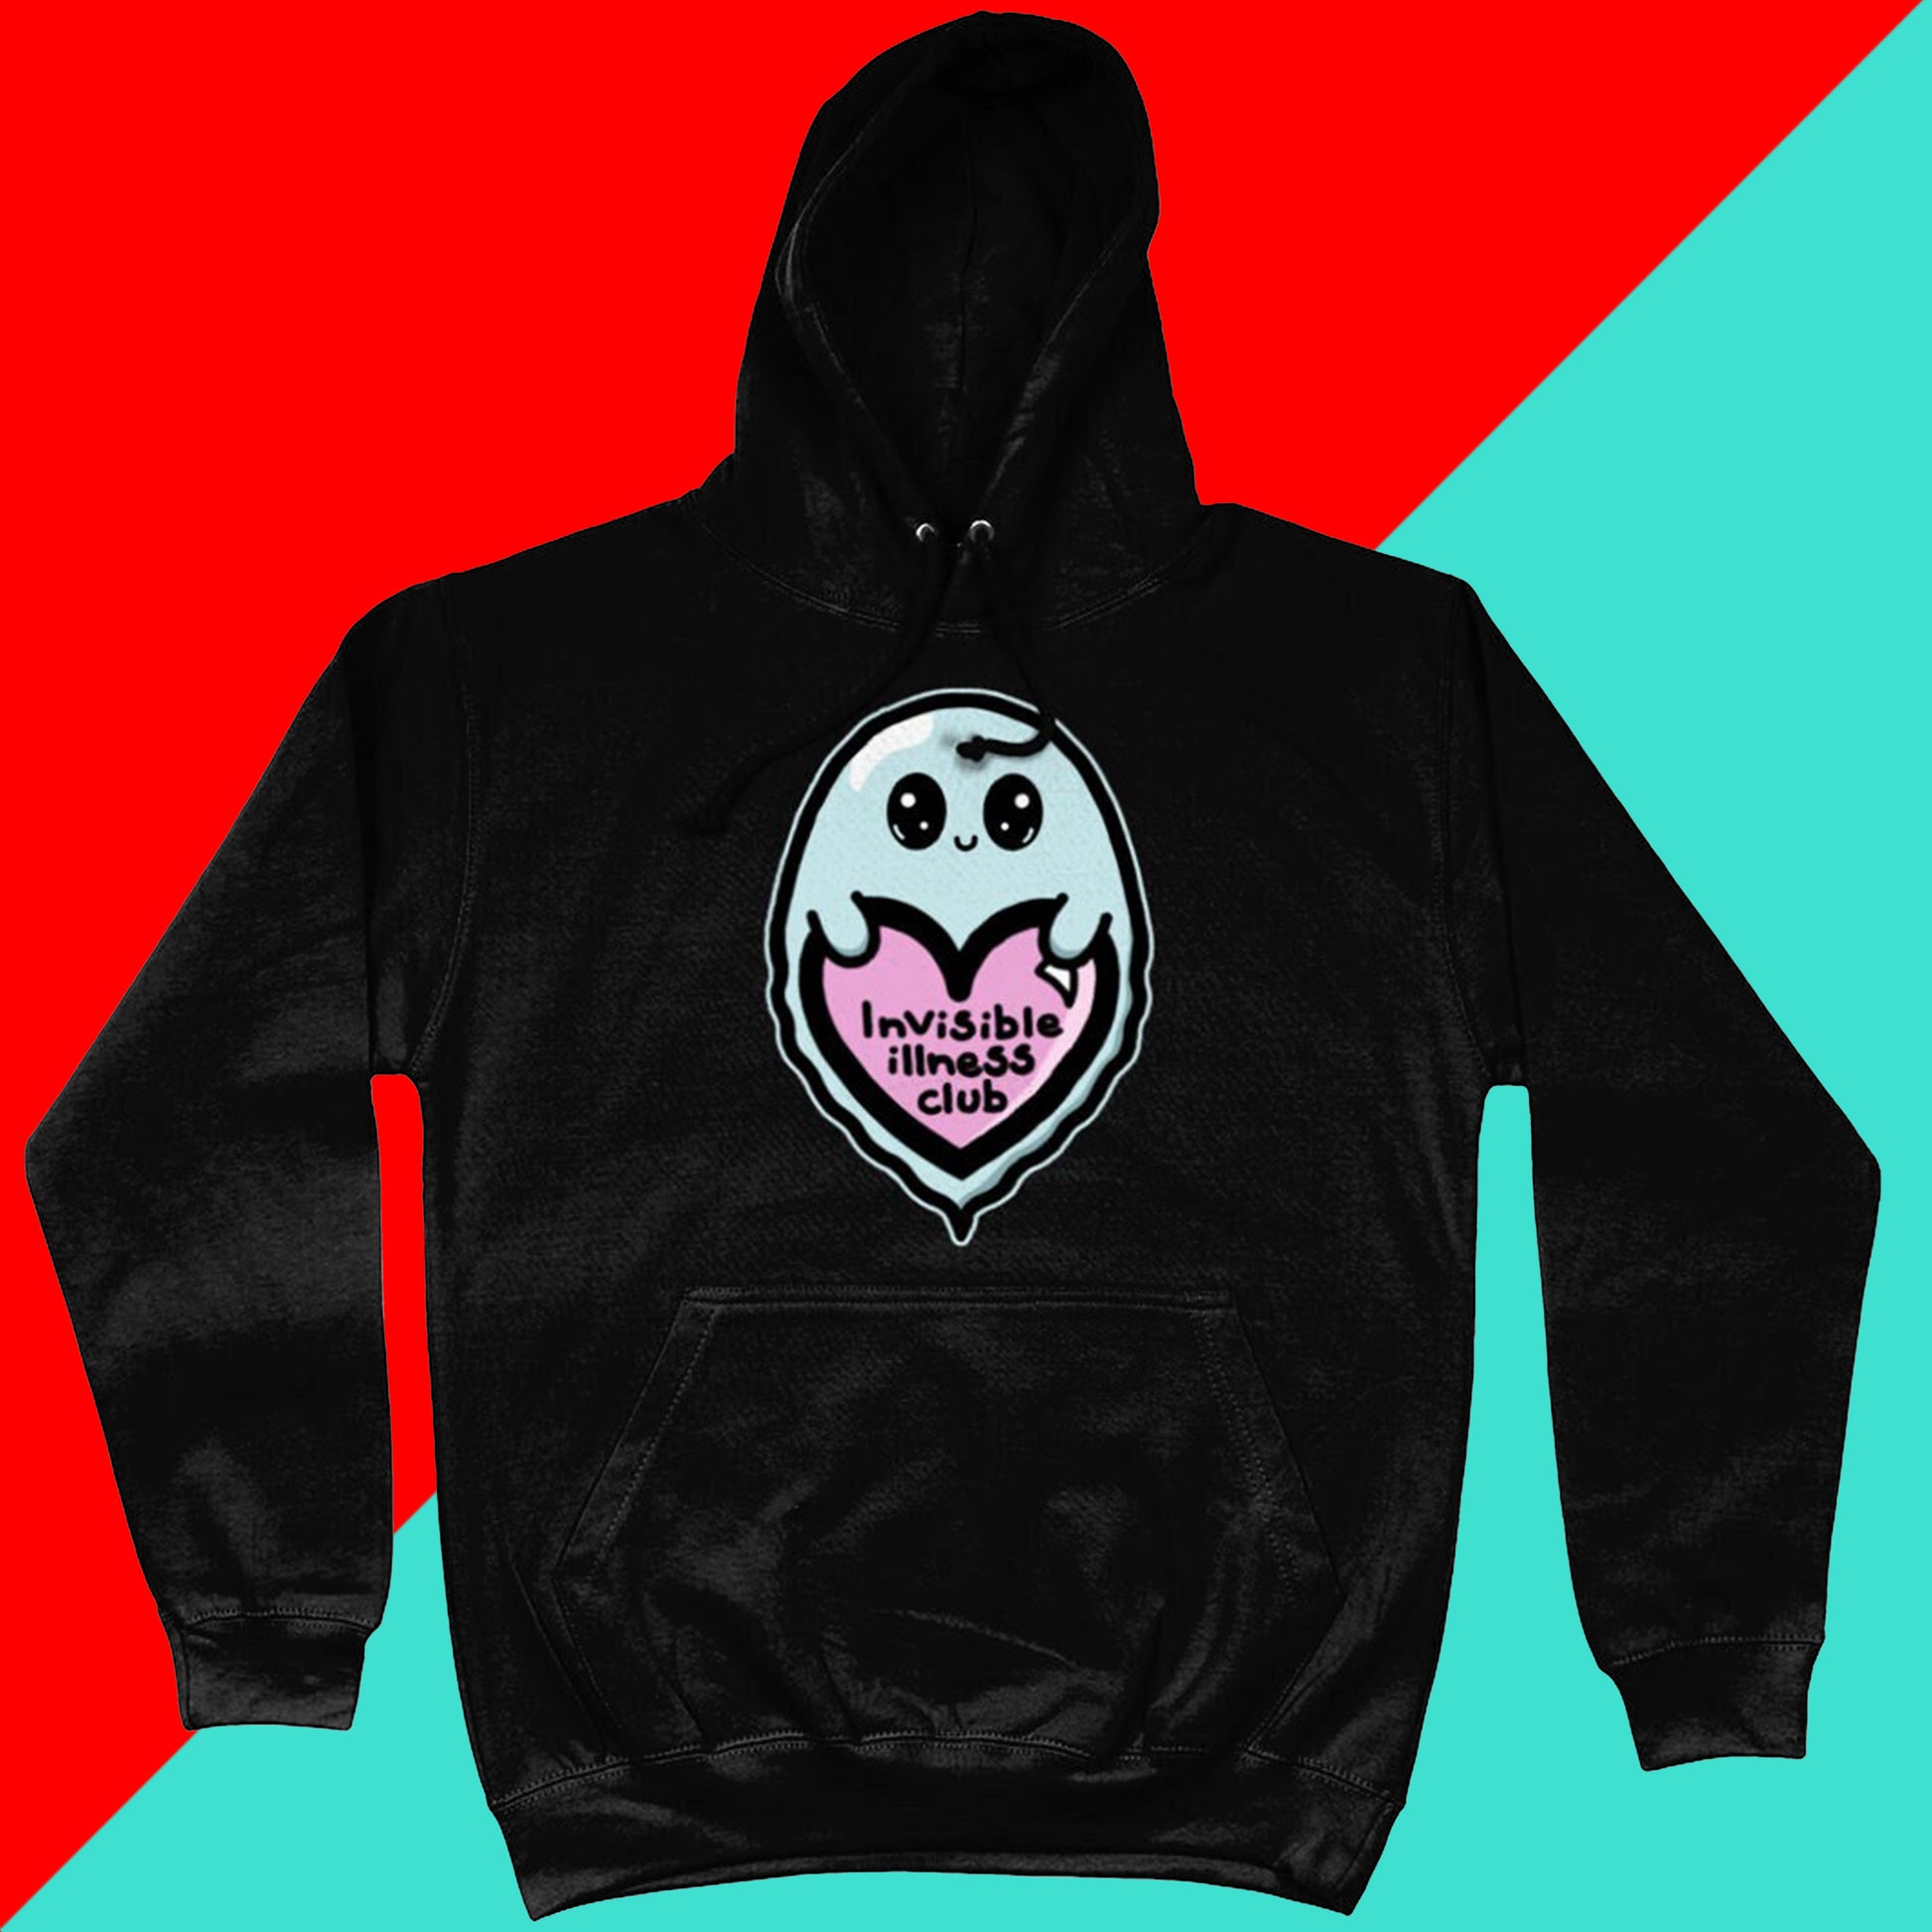 The Invisible Illness Club Black Hoodie on a red and blue background. The black hoodie has a pastel blue smiling ghost with big sparkly eyes holding up a pastel pink heart with black text reading 'invisible illness club'. The hoodie has a large front pocket and black drawstring hood. The hand drawn design is raising awareness for hidden disabilites.